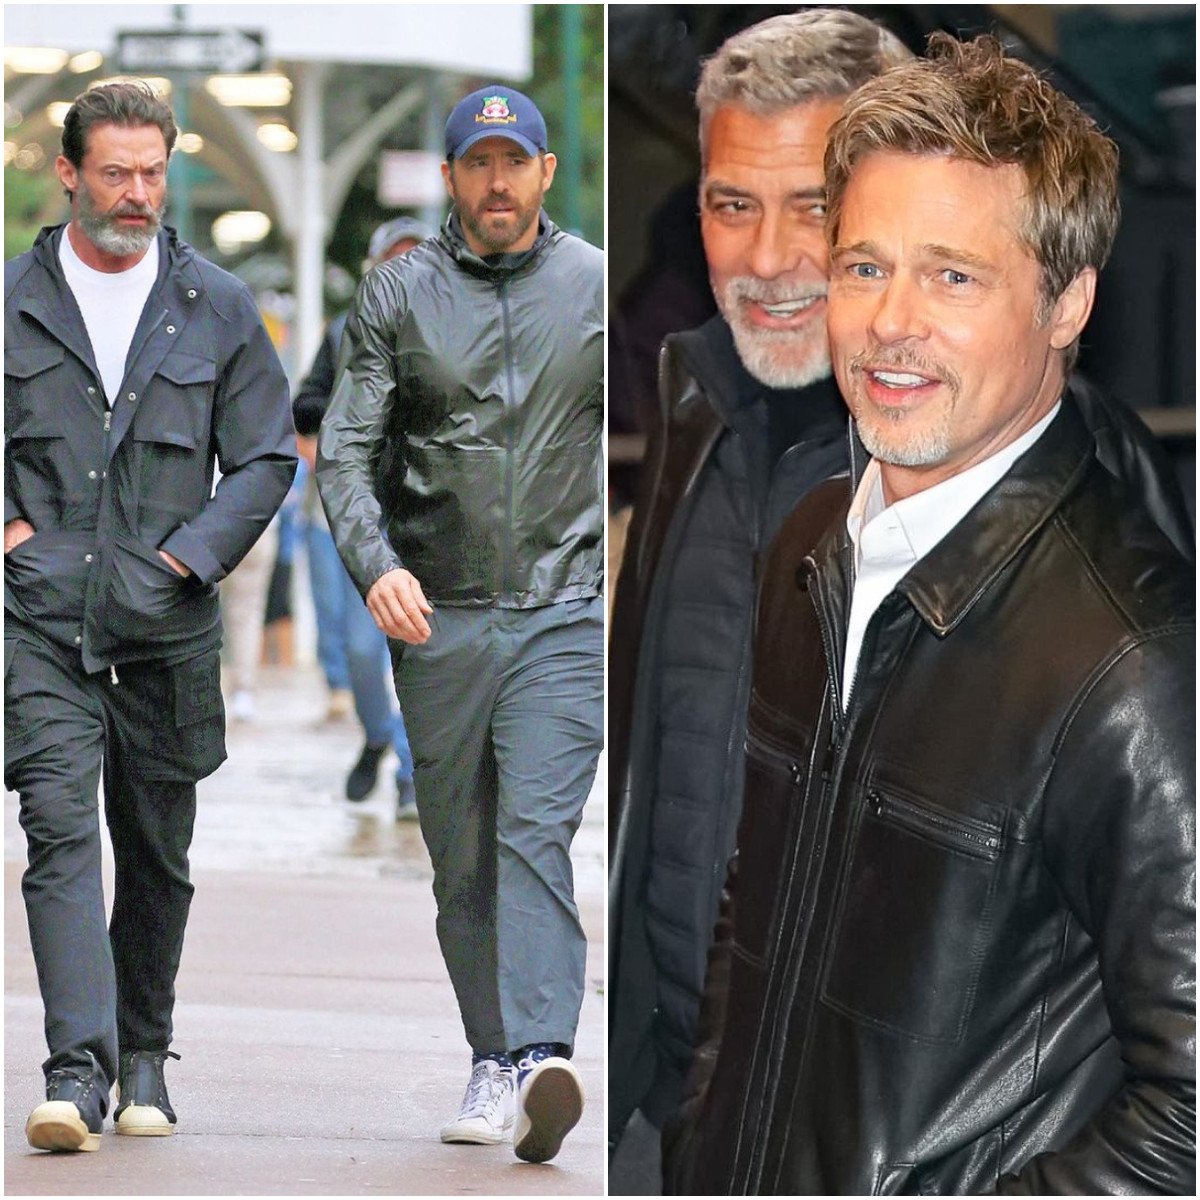 Hugh Jackman and Ryan Reynolds, and George Clooney and Brad Pitt, are known for their long-time “bromances”. Photos: Instagram